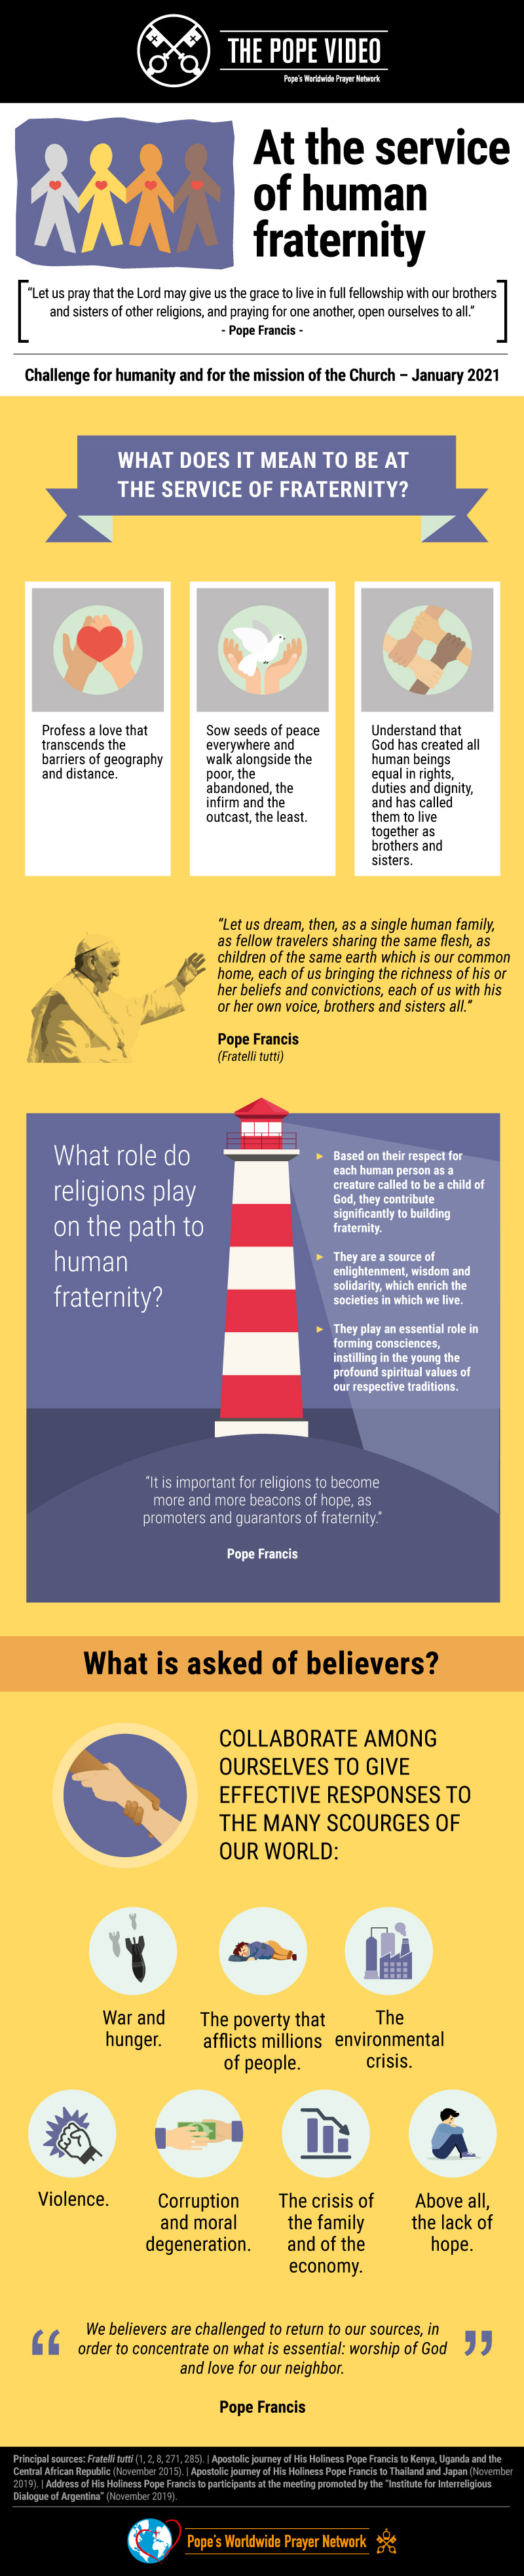 Infographic-TPV-1-2021-EN-The-Pope-Video-At-the-service-of-human-fraternity.jpg